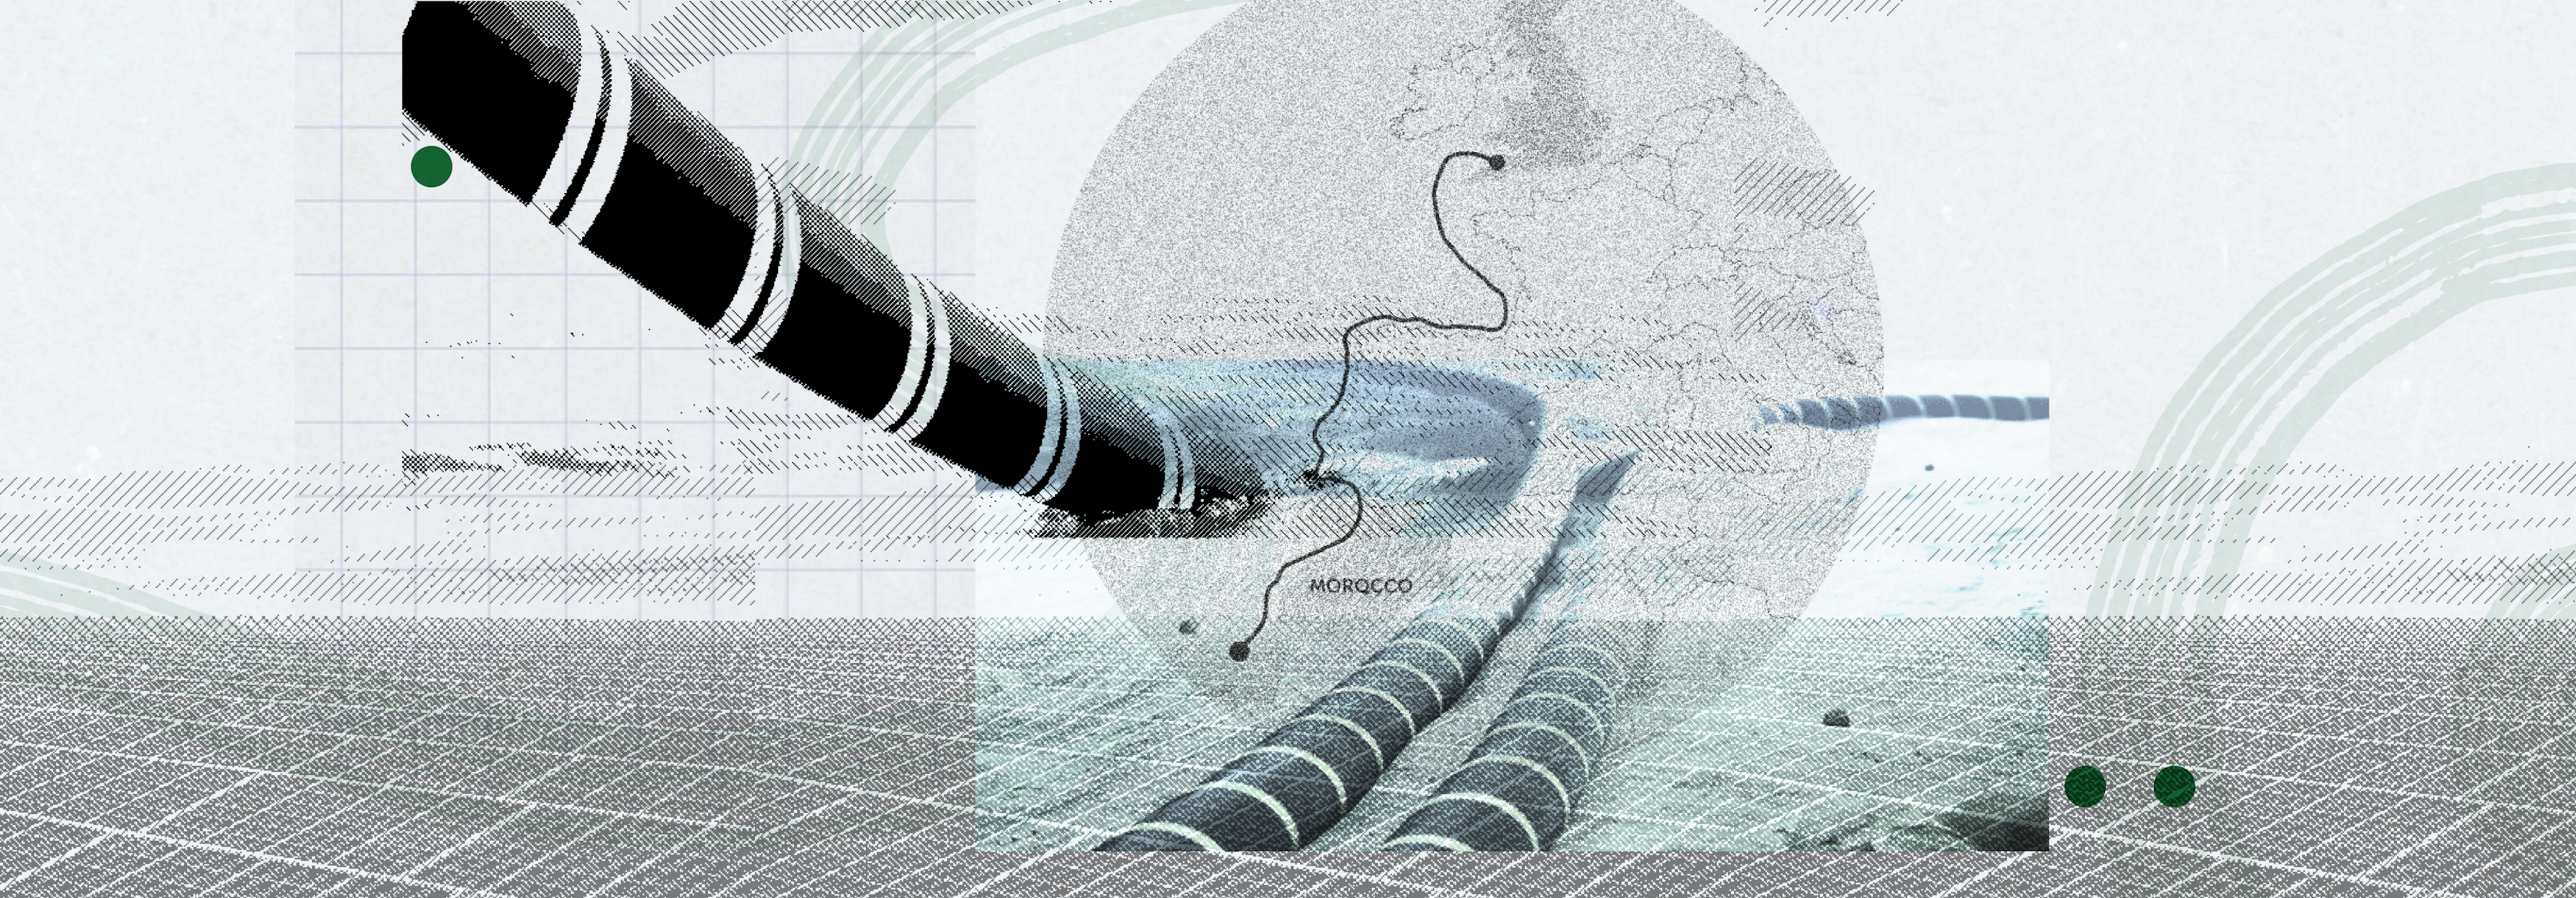 A collage image of undersea electricity cables and Morocco.